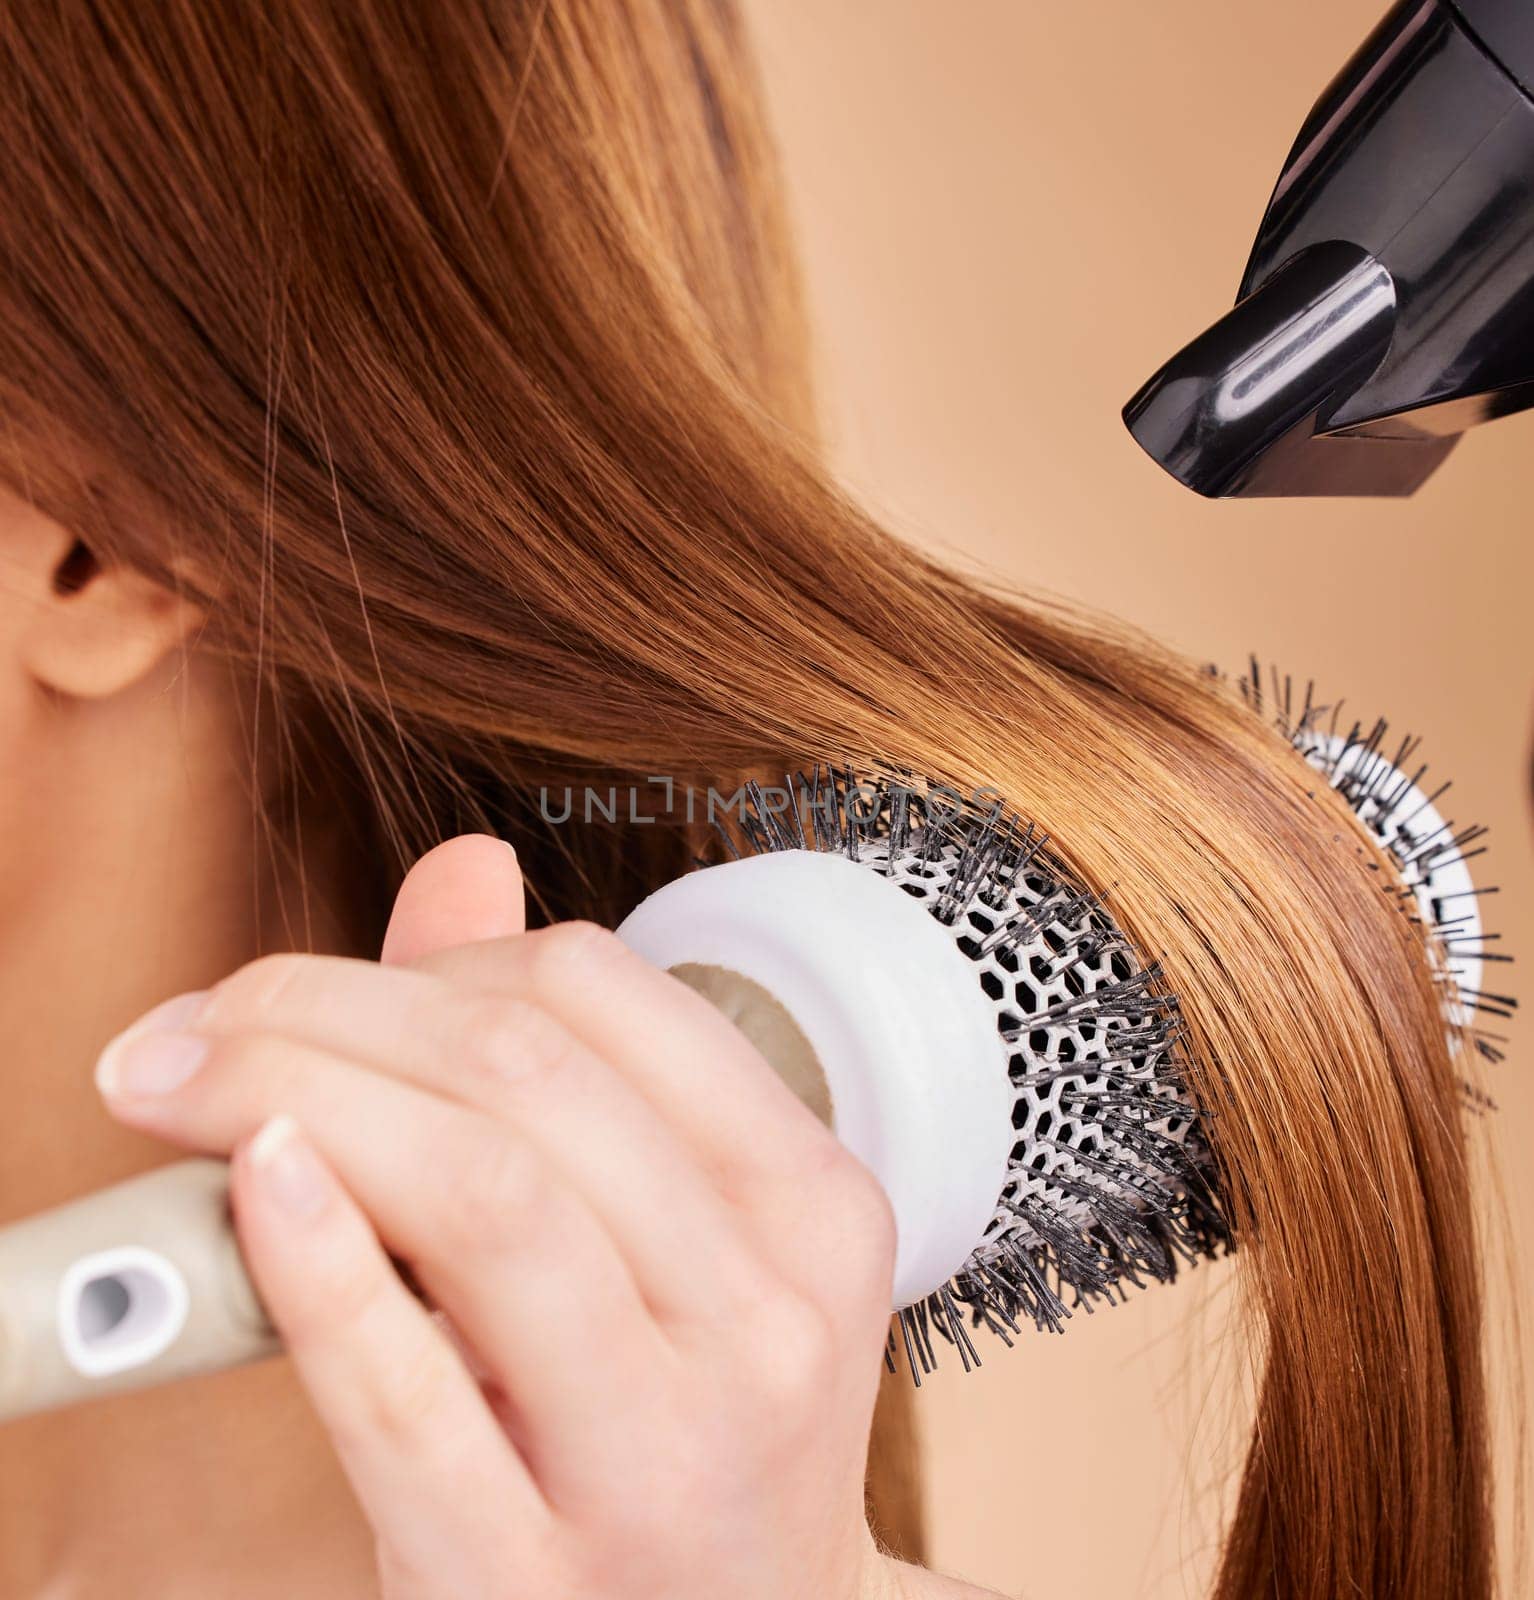 Hair, closeup and woman with hairdryer in studio for beauty, blowing and styling on brown background. Zoom, haircare and girl with salon treatment, hairstyle and hairdressing appliance isolated.